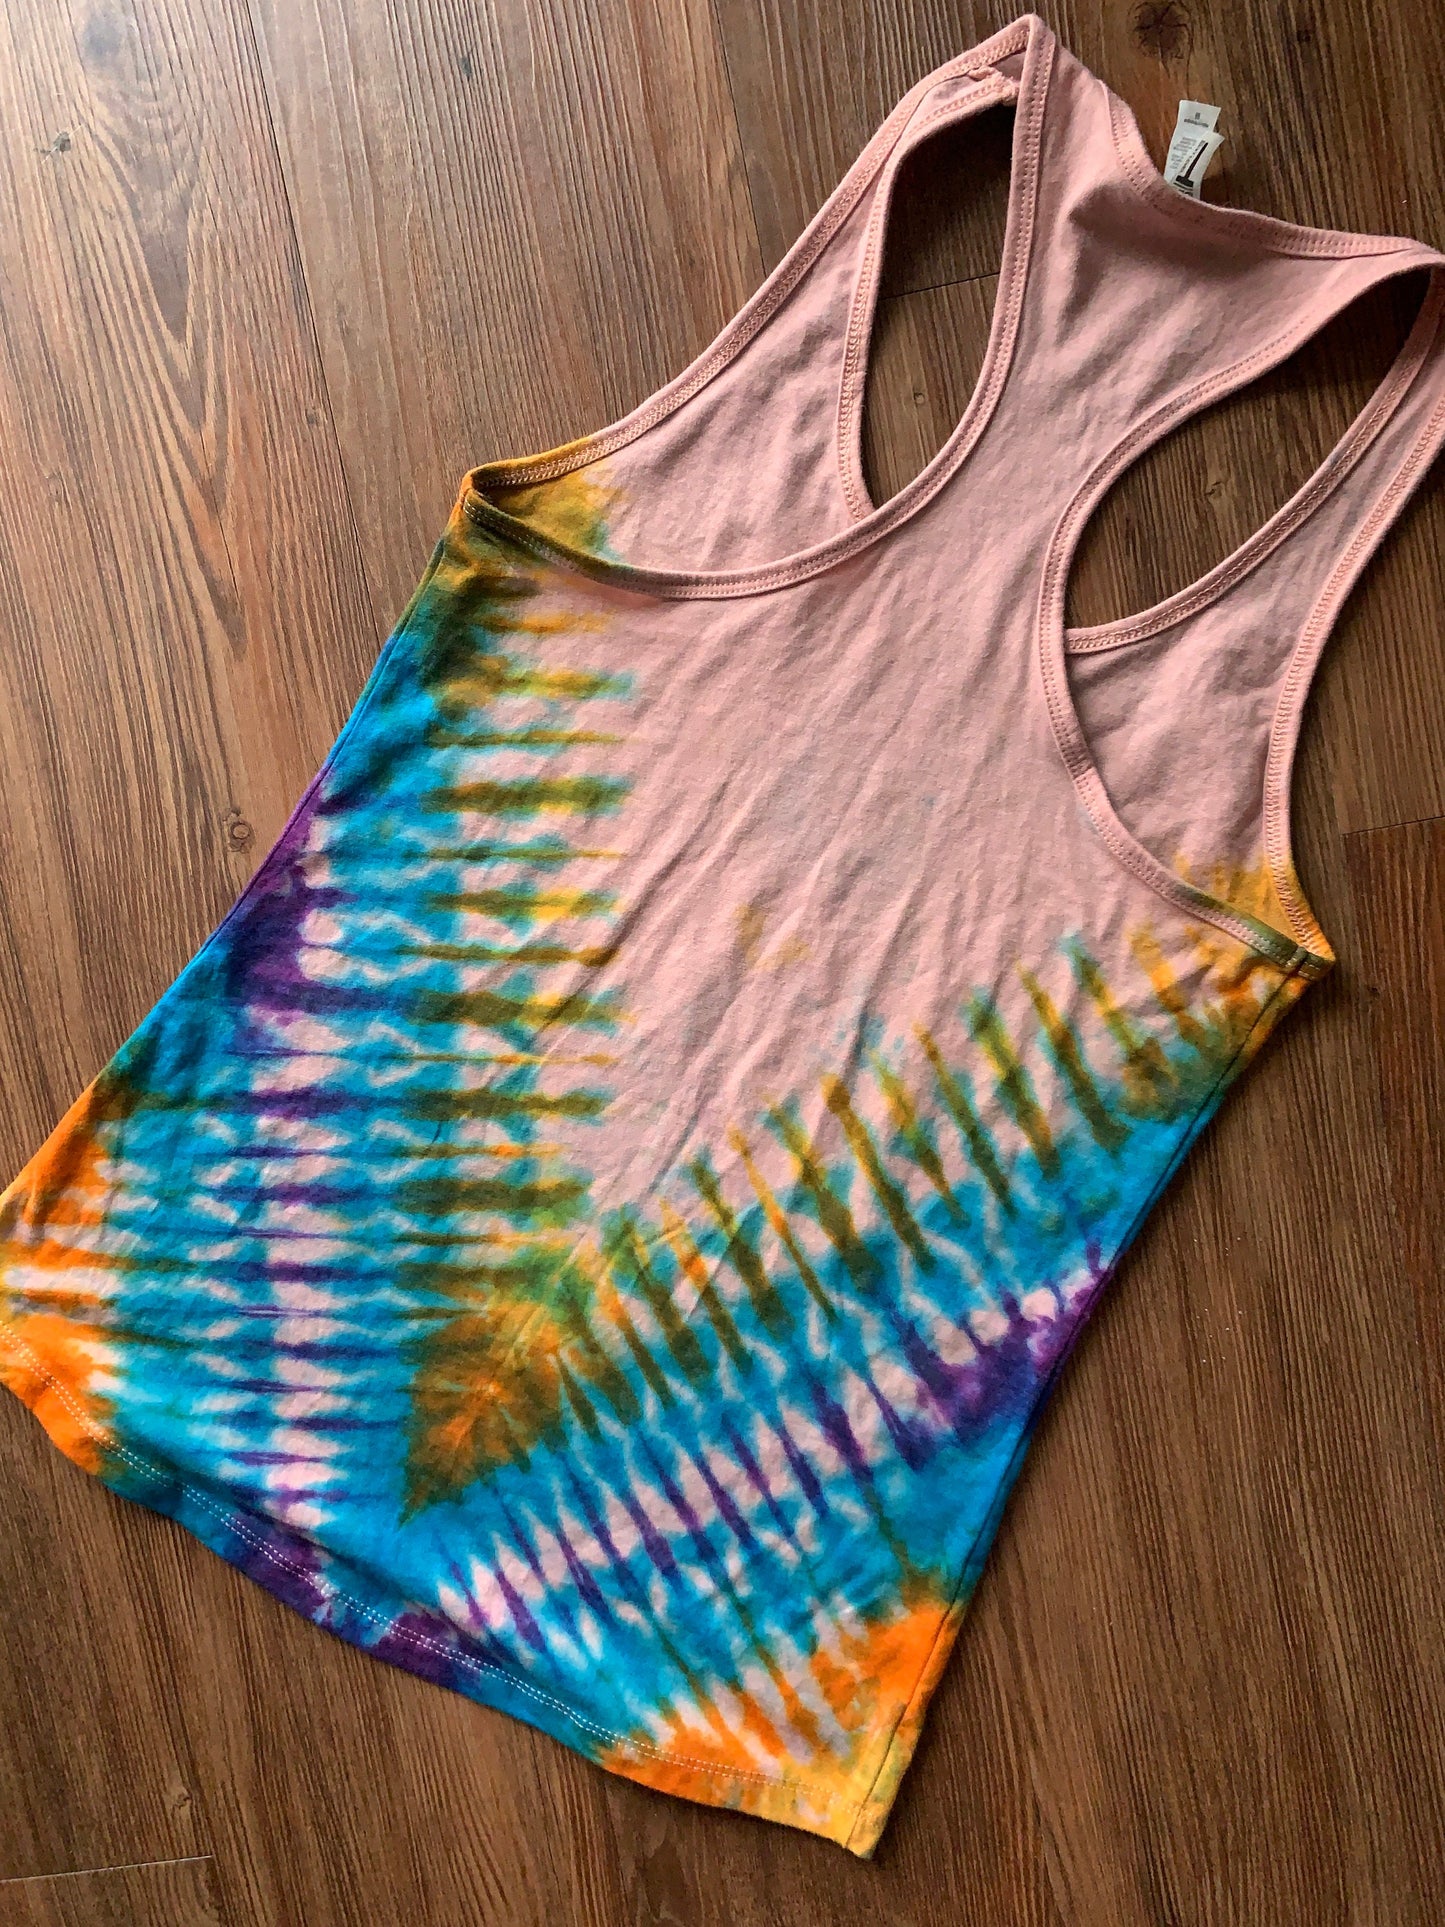 Boo-Bees Tie Dye Tank Top | Pastel Tie Dye Sleeveless Top | Women's Size Medium Racerback | Upcycled & Tie Dyed by Hand